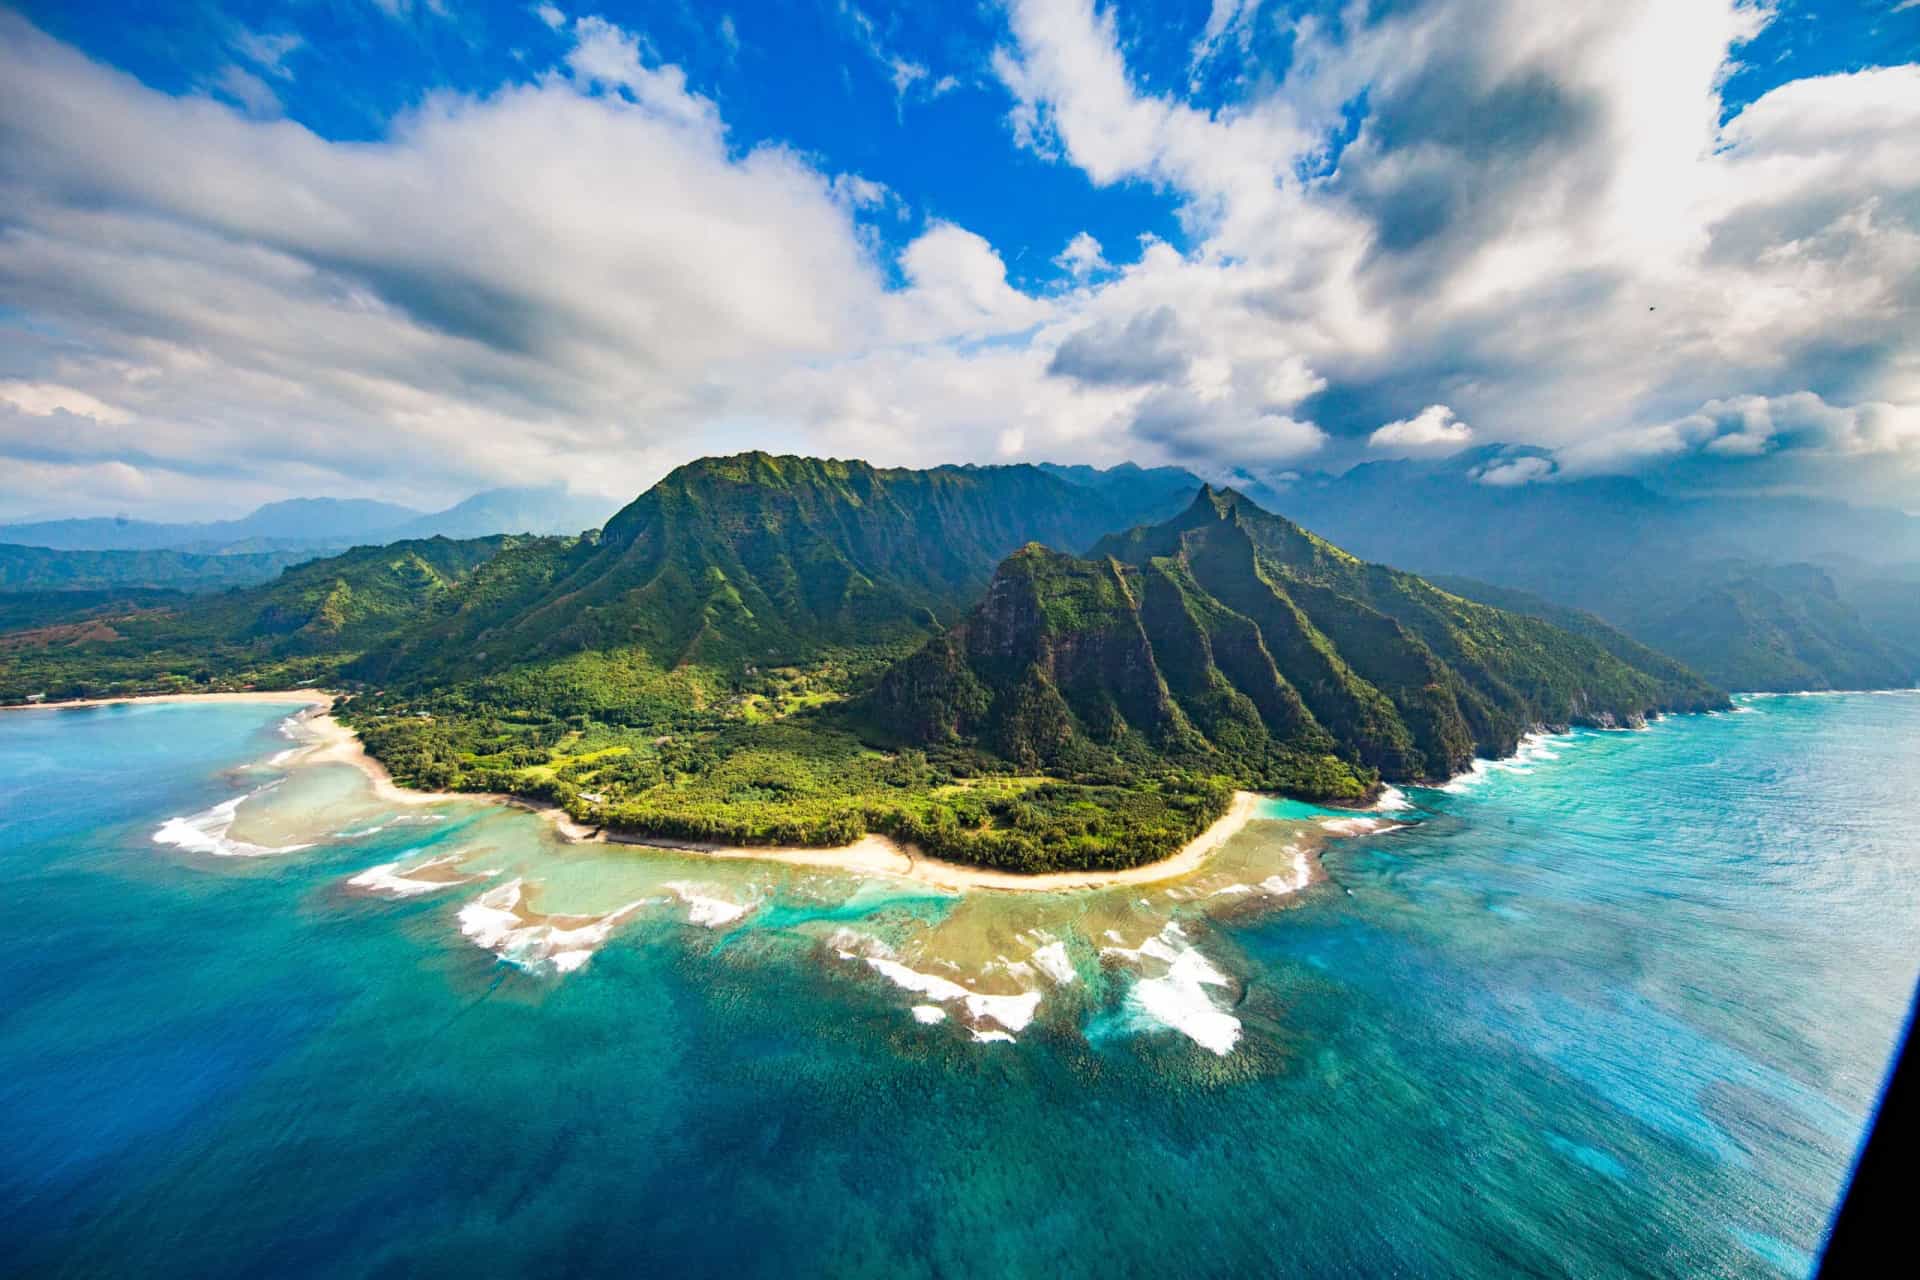 <p>Aries signs feel liberated when doing activities, which is something they need due to their outgoing nature. A trip to Kauai in Hawaii is a great option, as it combines beautiful nature, outdoor activities, and amazing weather. Just imagine zip lining over the lush jungles!</p>